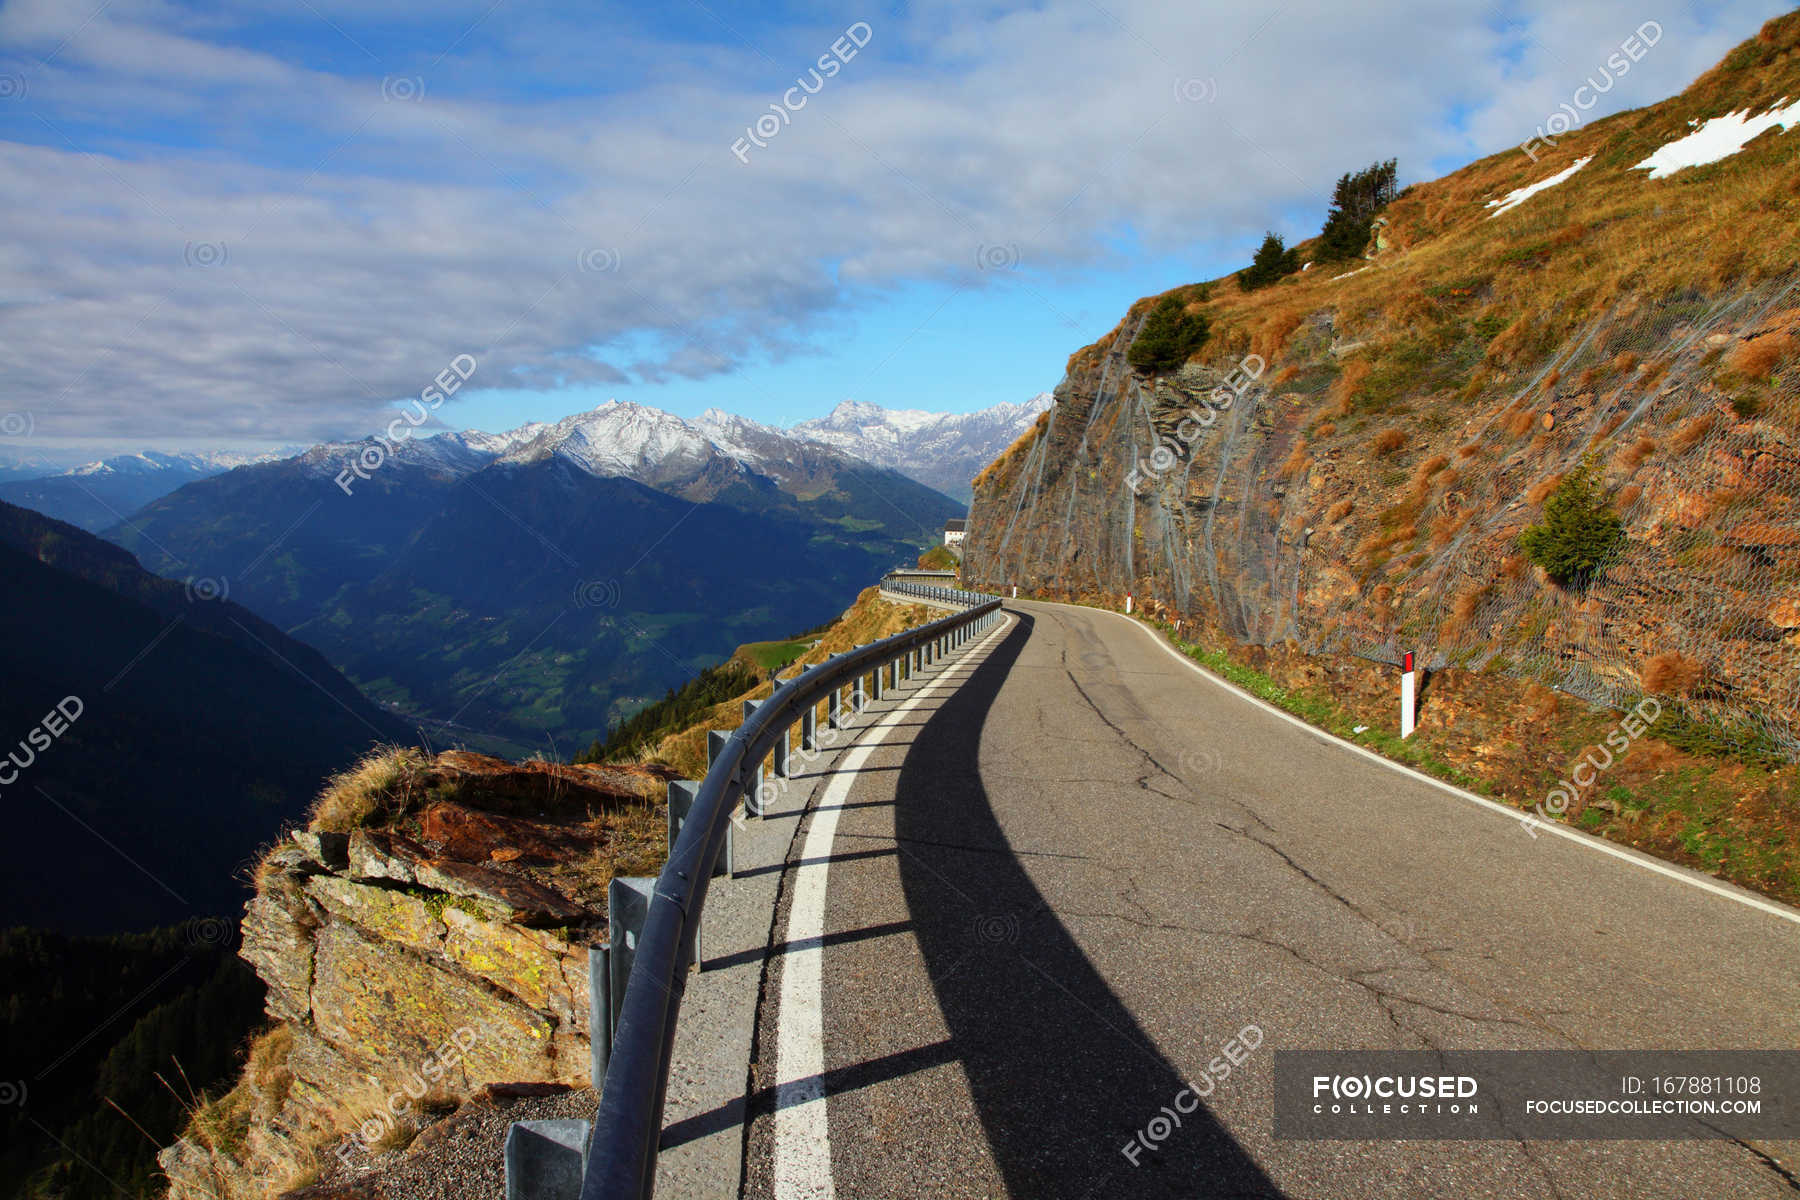 Railing along curved mountain road — Stock Photo | #167881108